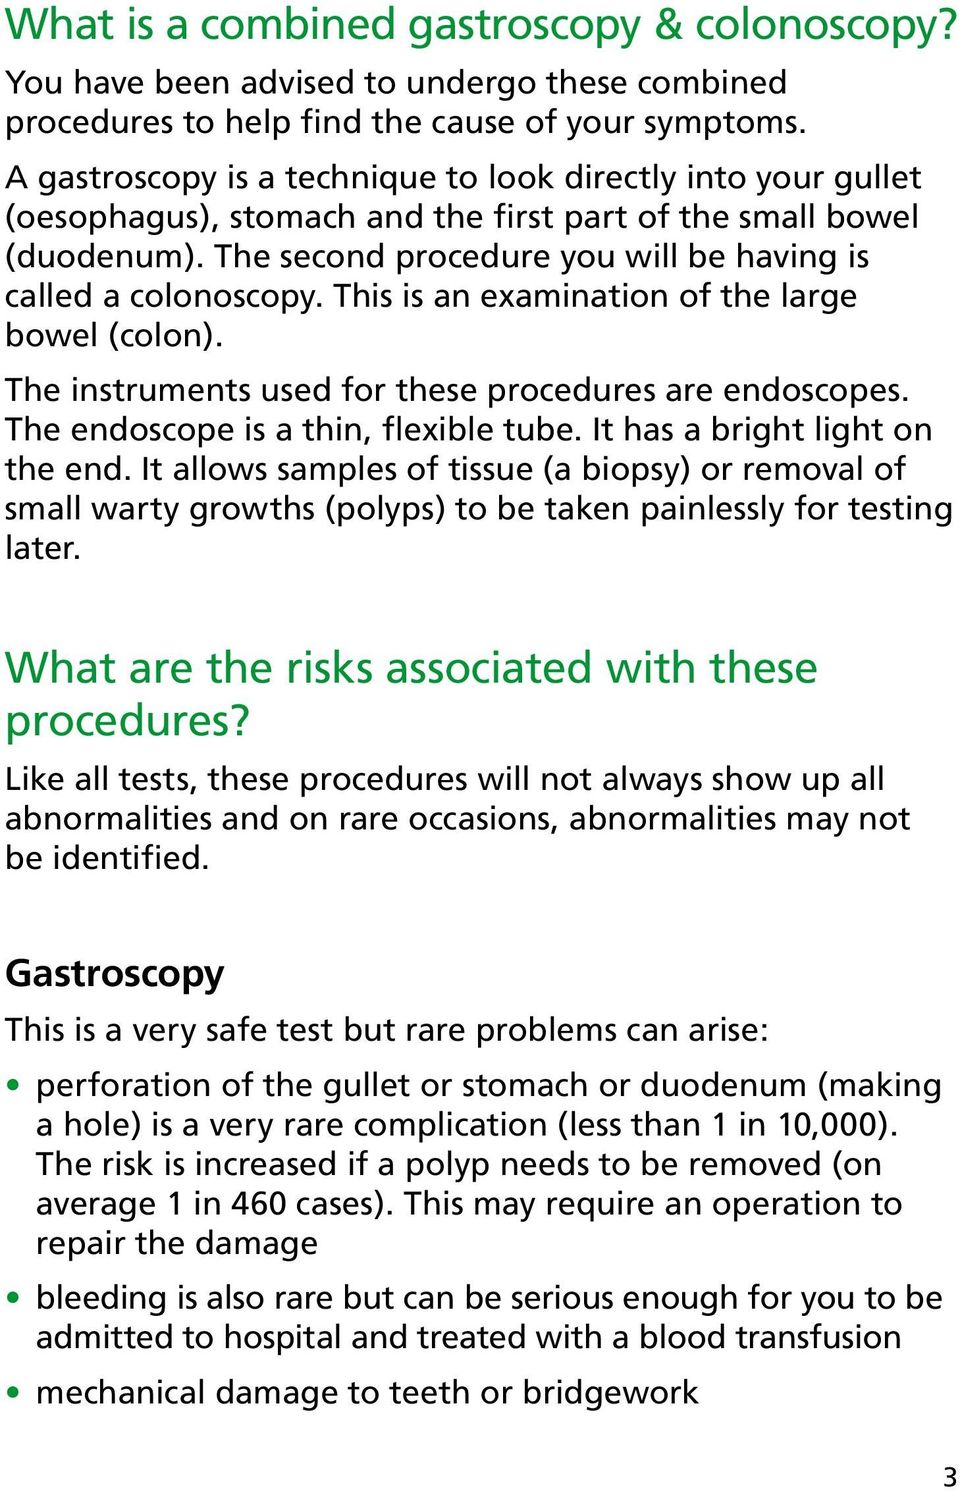 This is an examination of the large bowel (colon). The instruments used for these procedures are endoscopes. The endoscope is a thin, flexible tube. It has a bright light on the end.